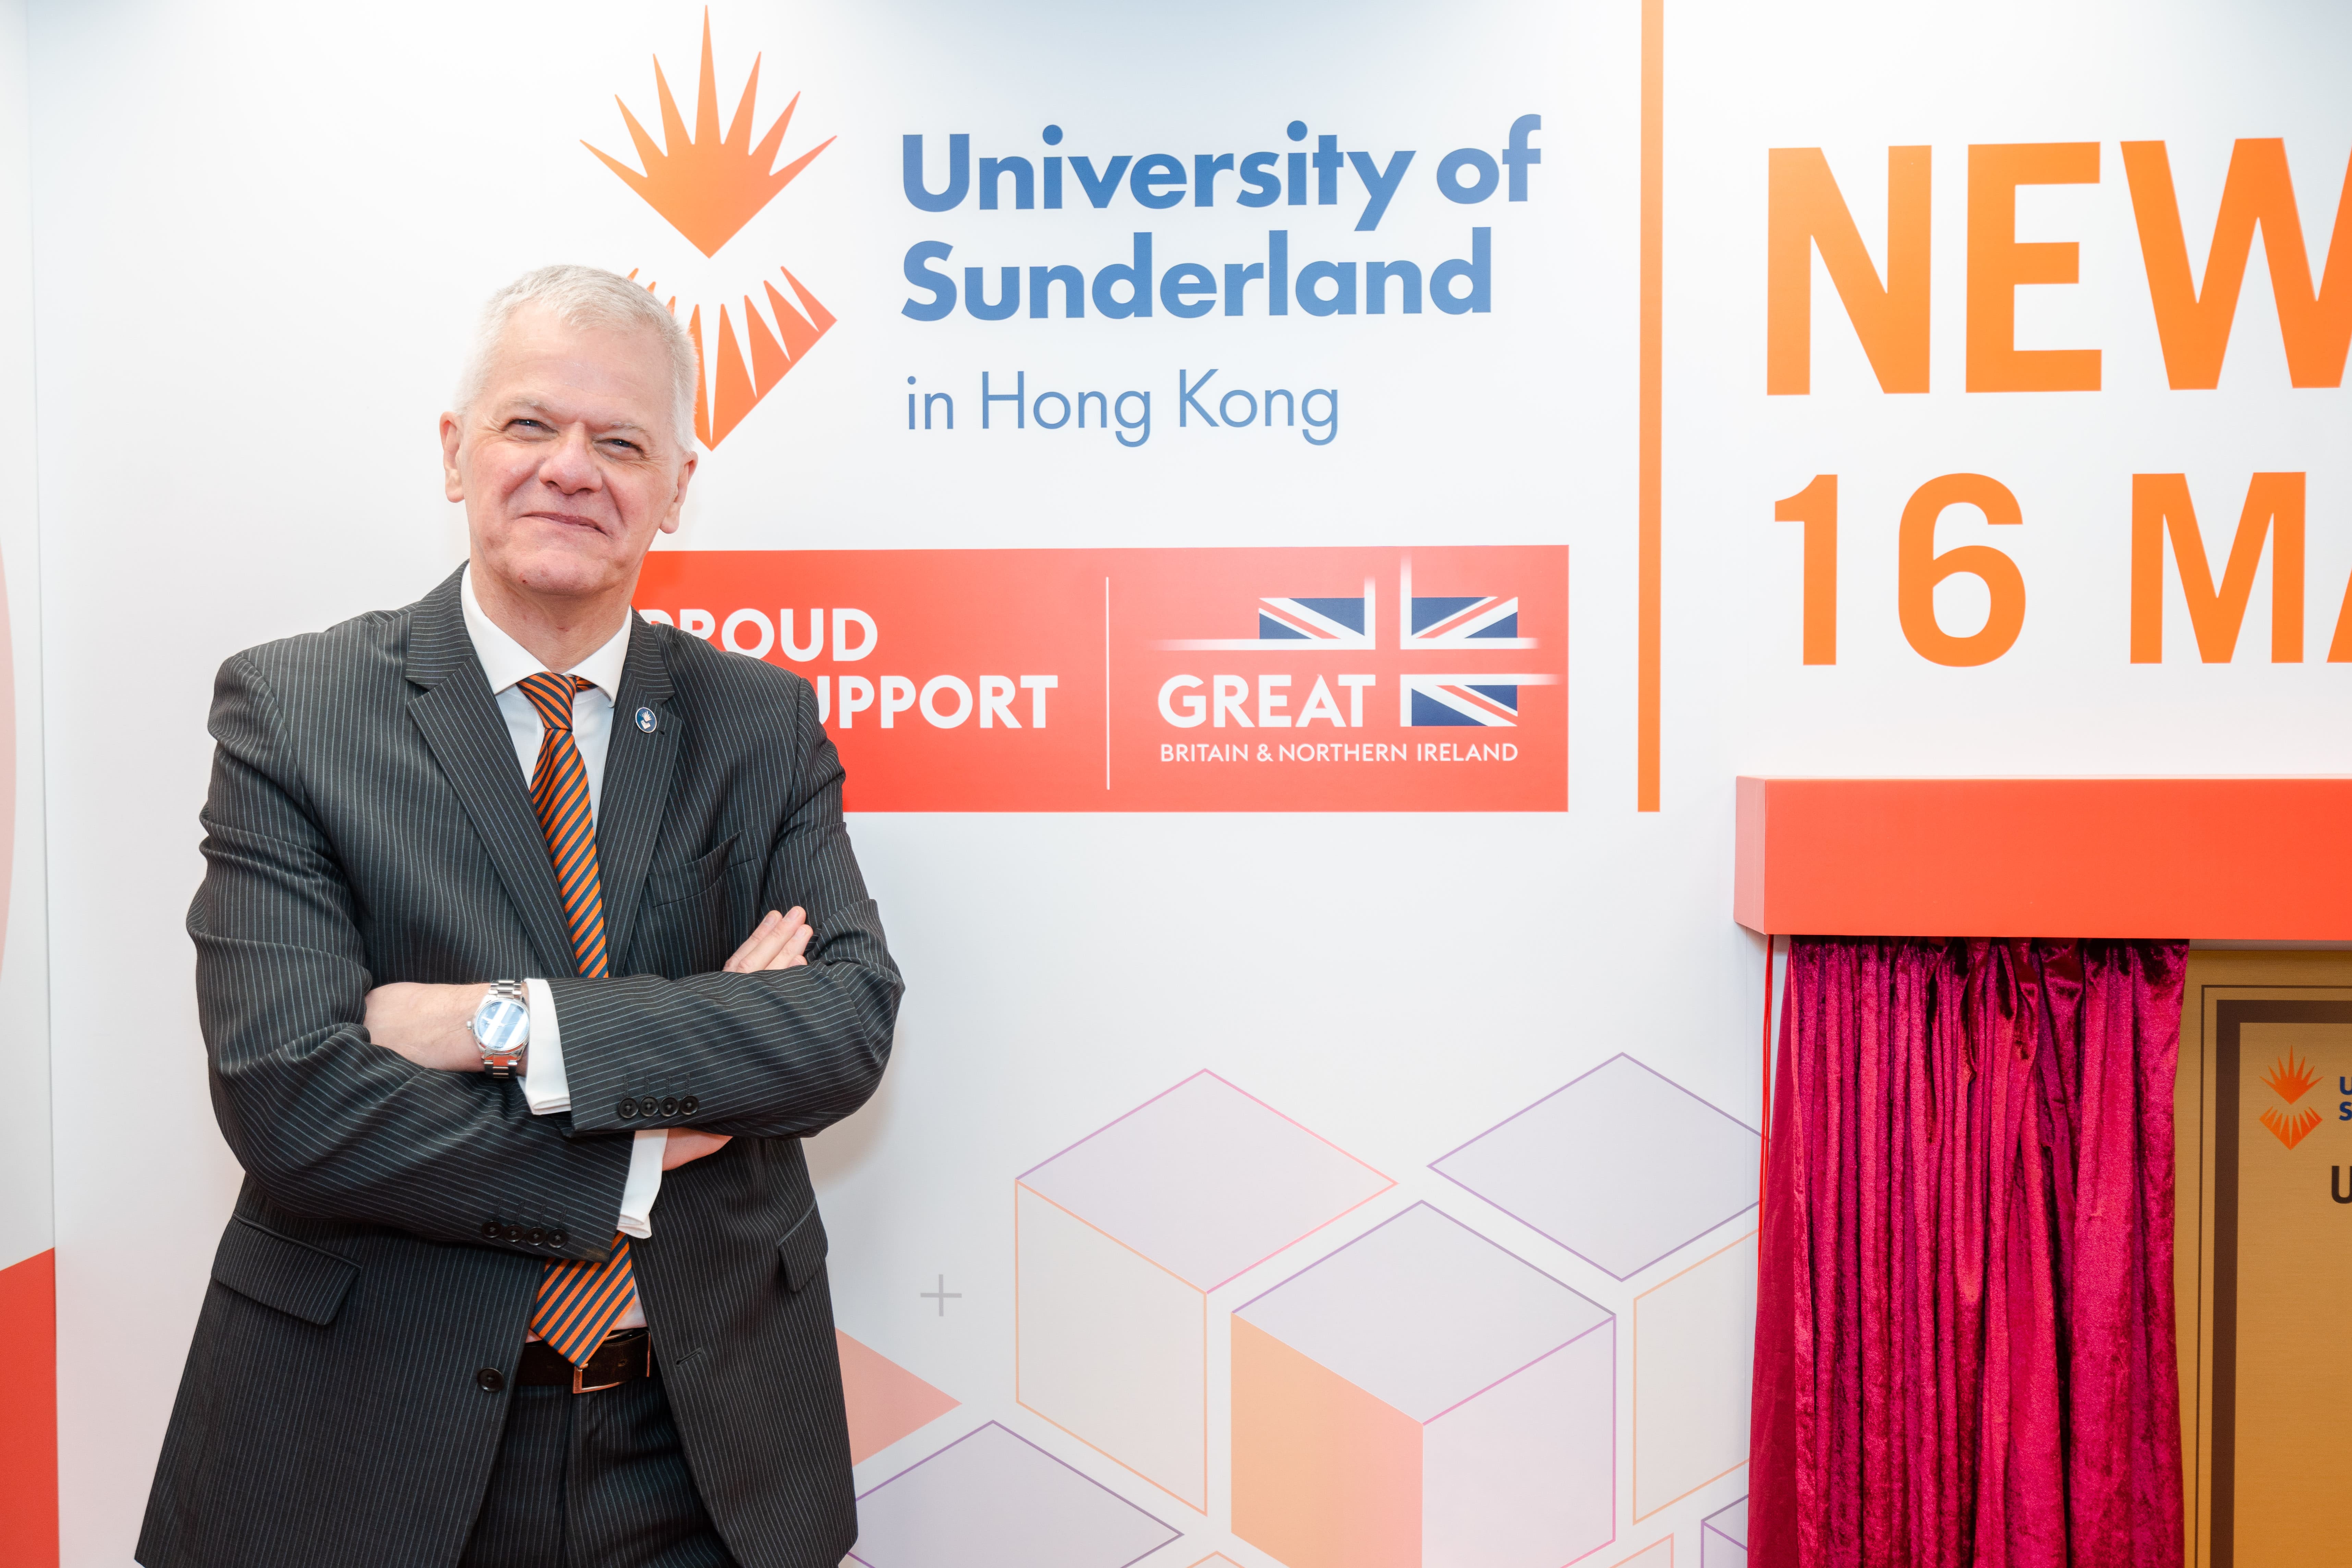 Sir David Bell KCB DL, the Vice-Chancellor and Chief Executive of the University of Sunderland, at the new campus opening of University of Sunderland in Hong Kong.